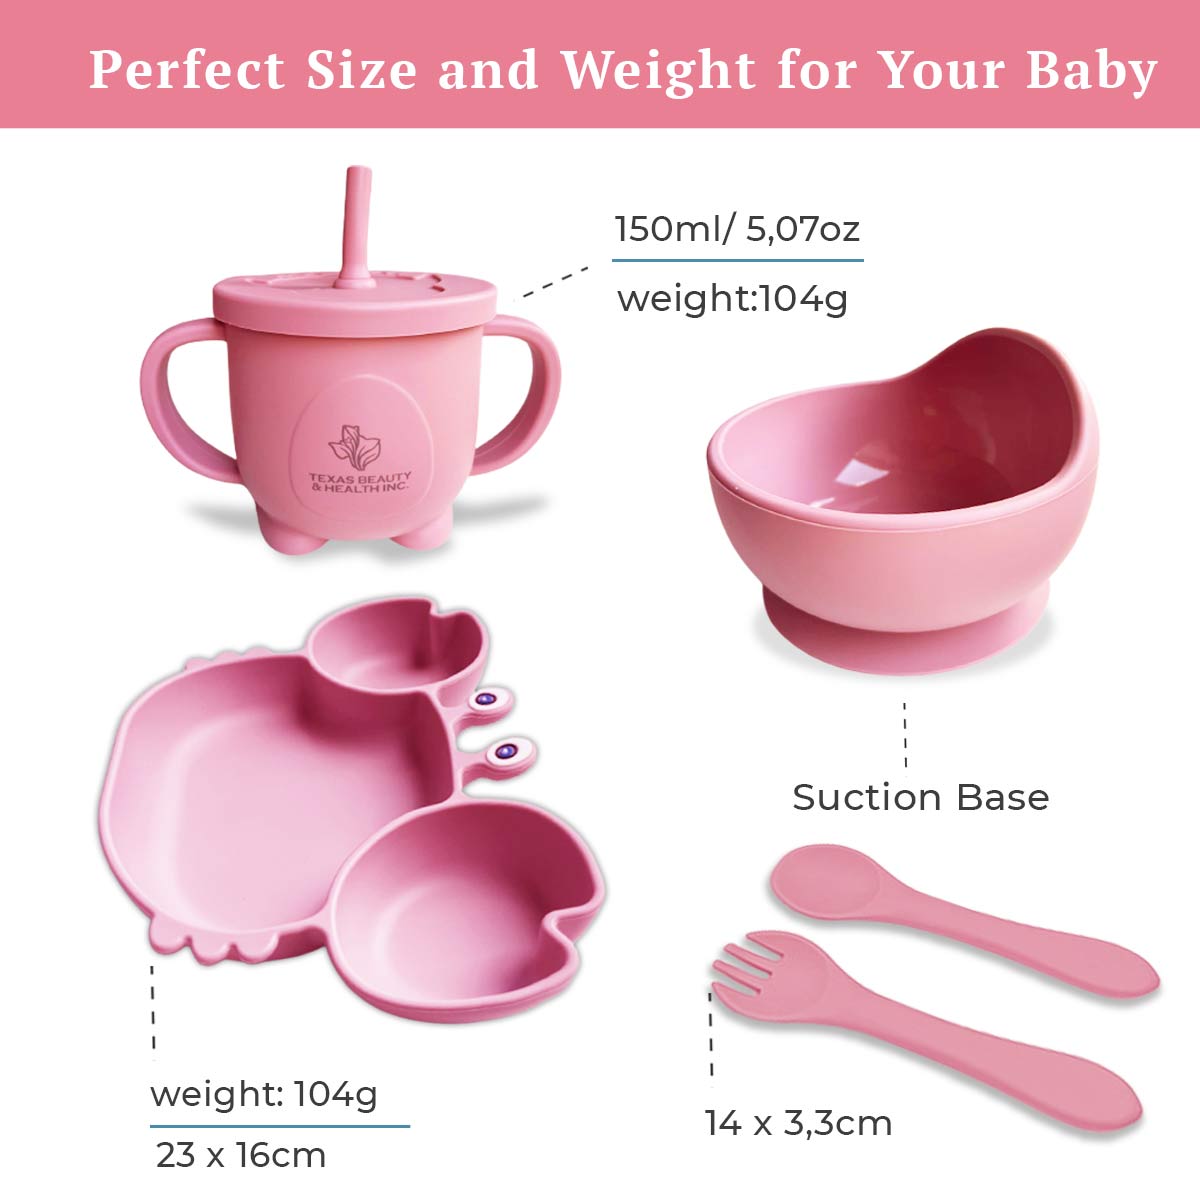 Texas Beauty & Health Princess Blushing Rose | Pink Silicone Baby Feeding Set for Girls | Suction Bowl, Divided Plate, Bib, Cup, Spoon, and Fork